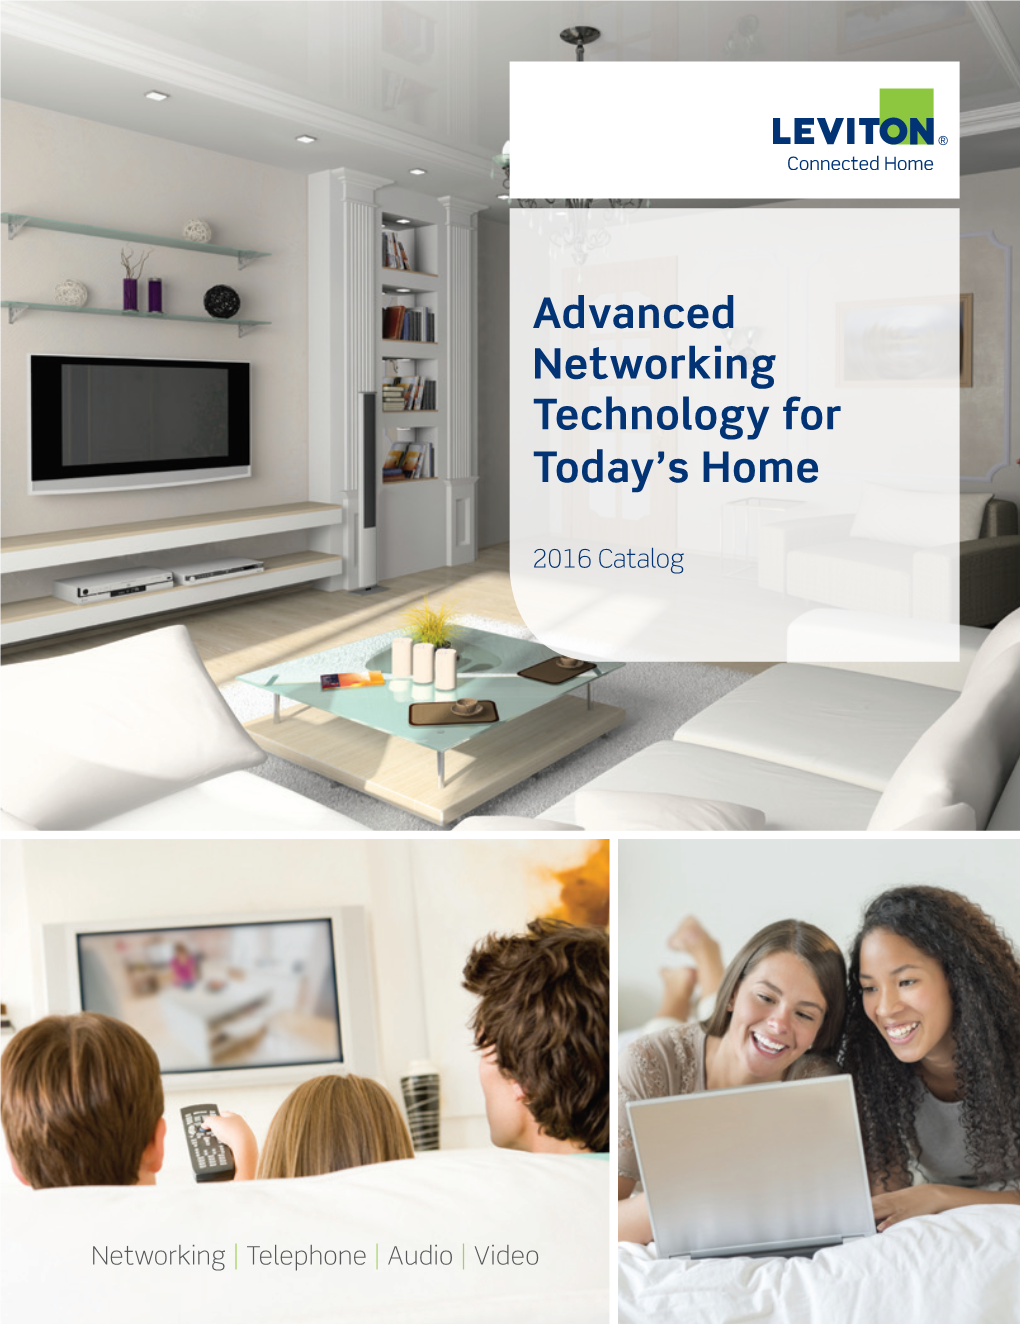 Advanced Networking Technology for Today's Home